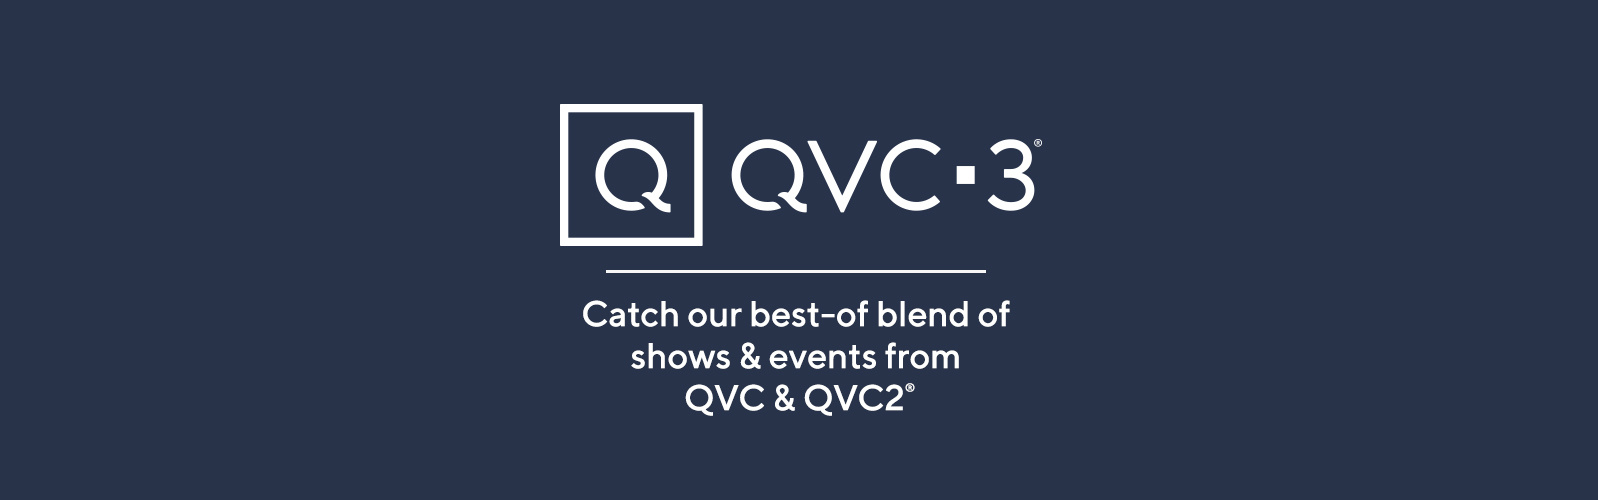 QVC3®  Catch out best-of blend of shows & events from QVC & QVC2®.